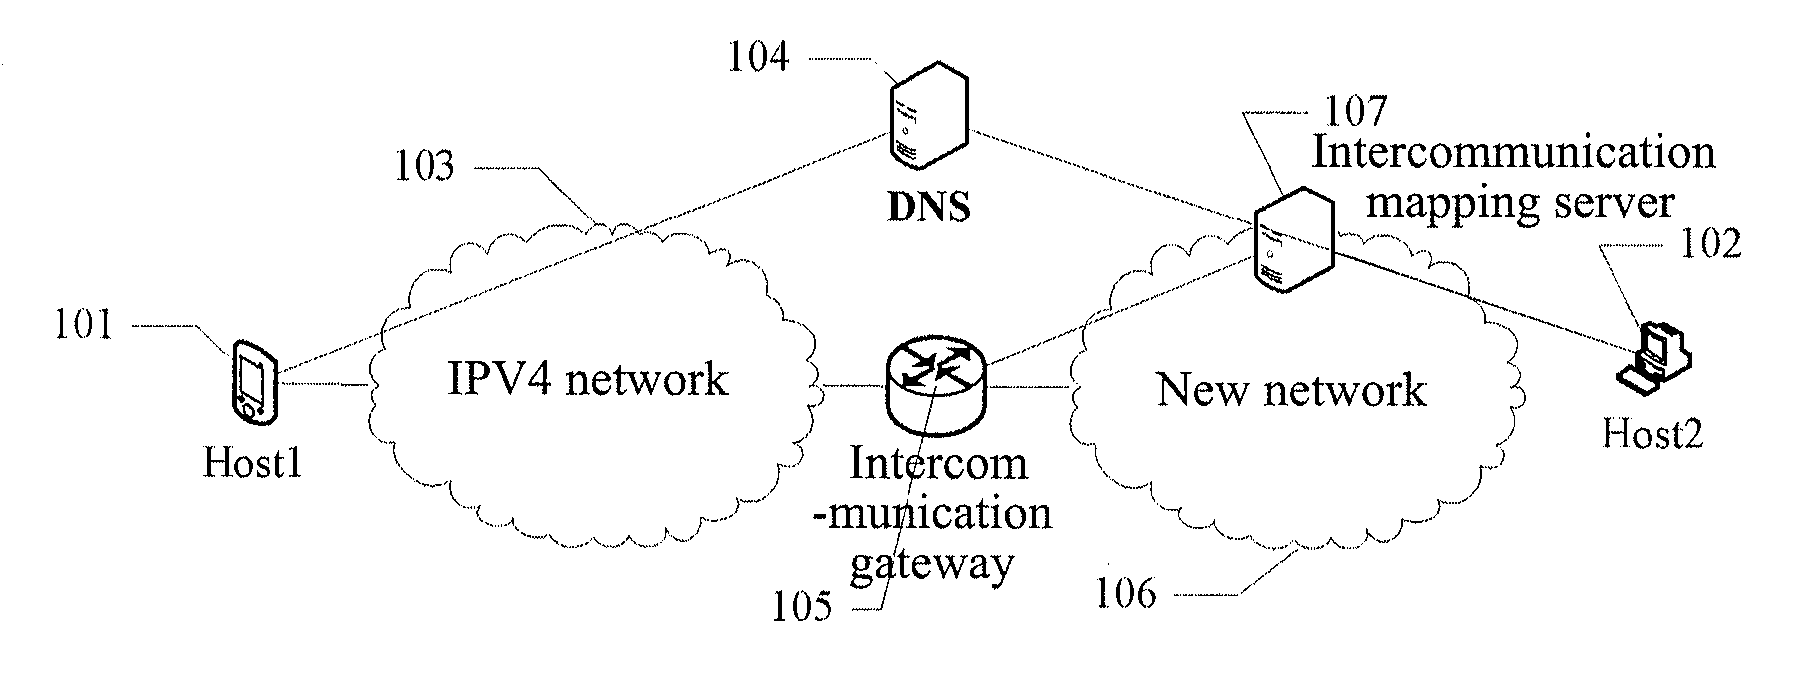 Method and system for implementing interconnection between internet protocol version 4 network and new network